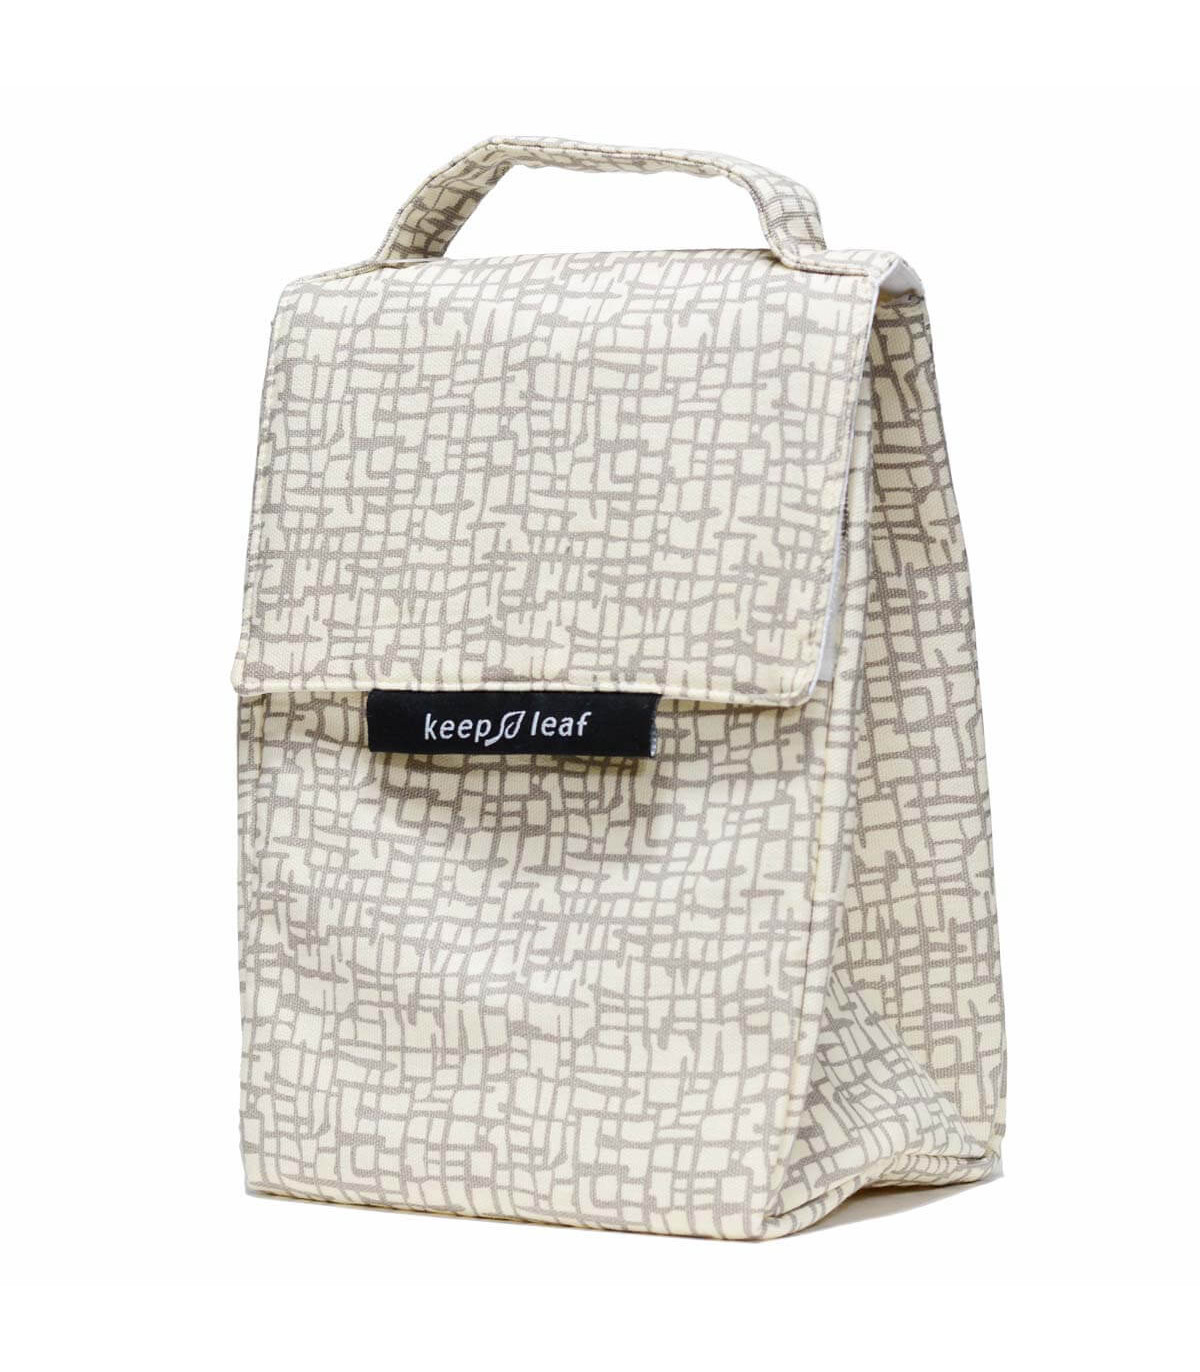 Lunch Bag - Sac Isotherme pour Repas, Mesh